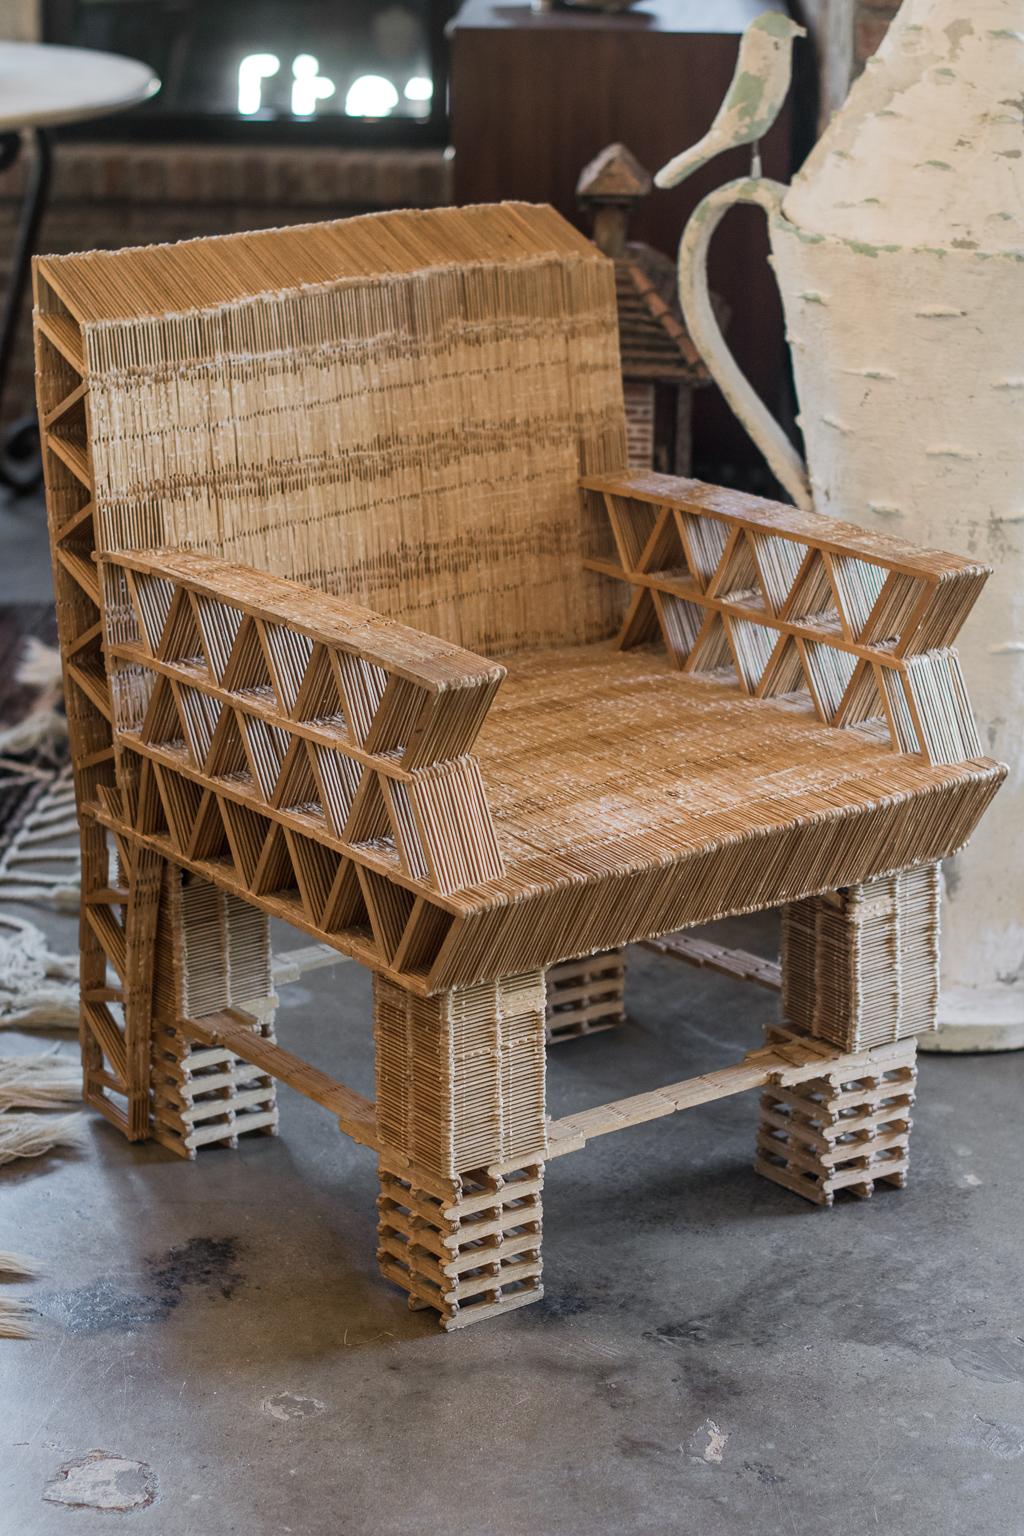 In a modern expression of tramp art, the crafter used popsicle sticks and glue to make functional art. Generously scaled chair that is more comfortable than expected. 20th century.